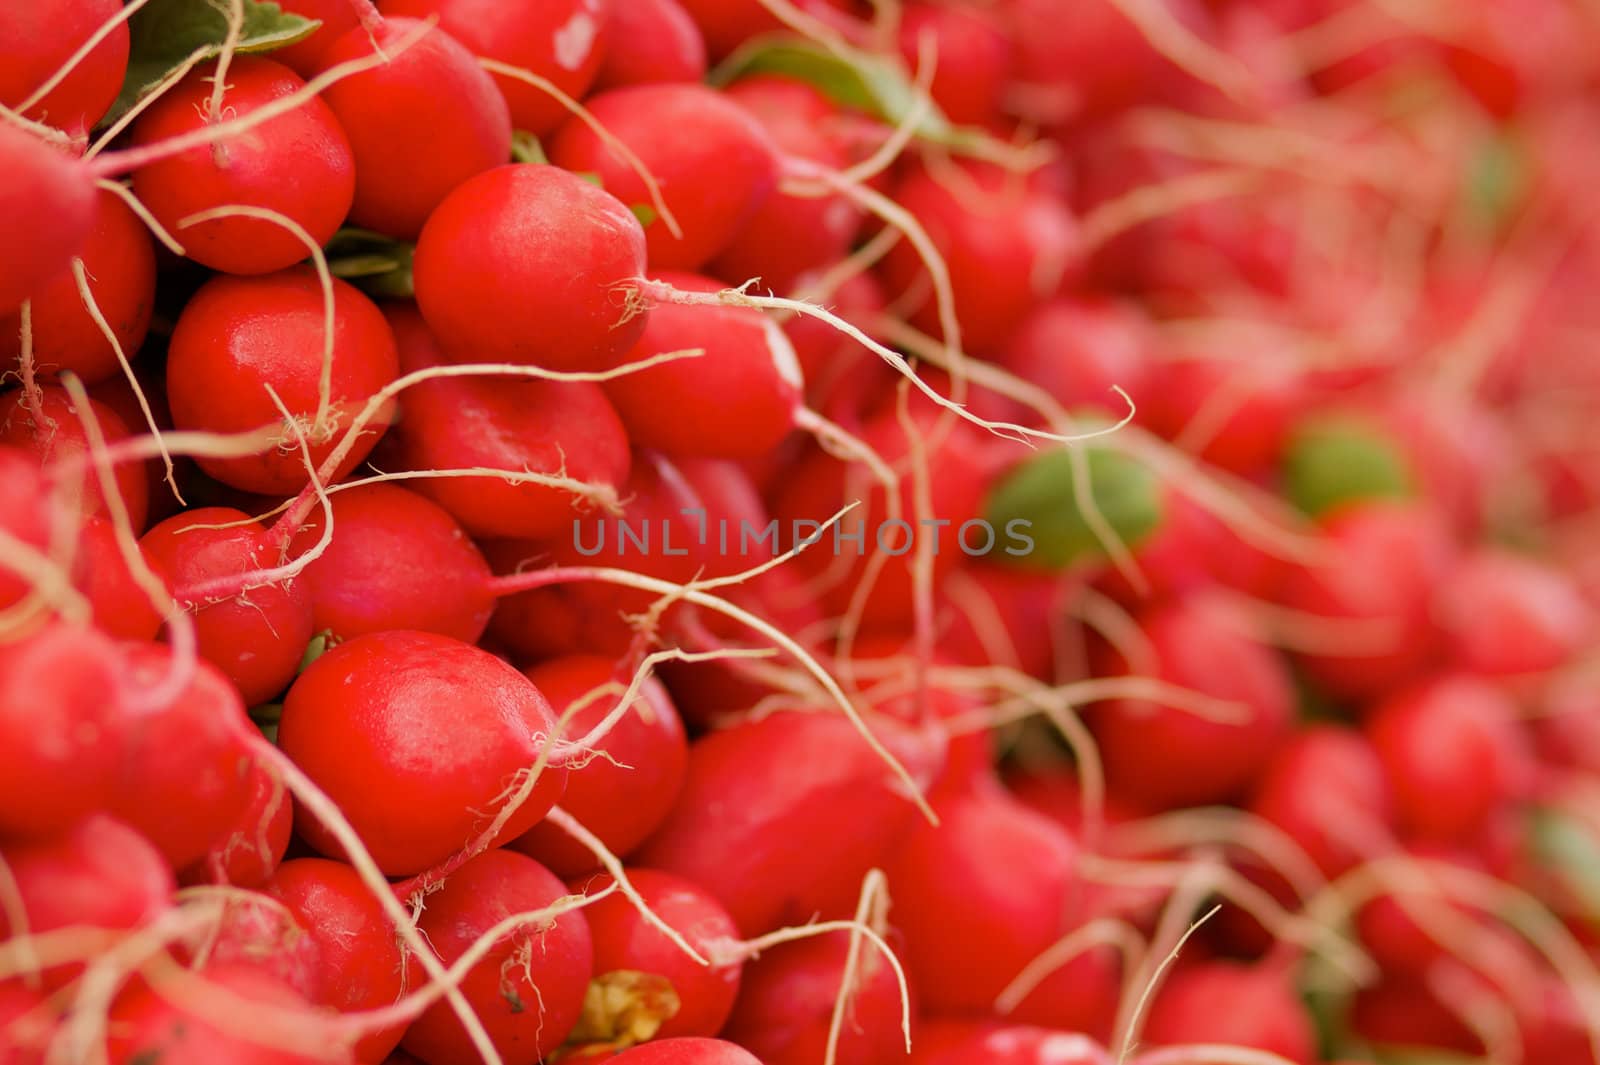 Pile of red radishes by bobkeenan